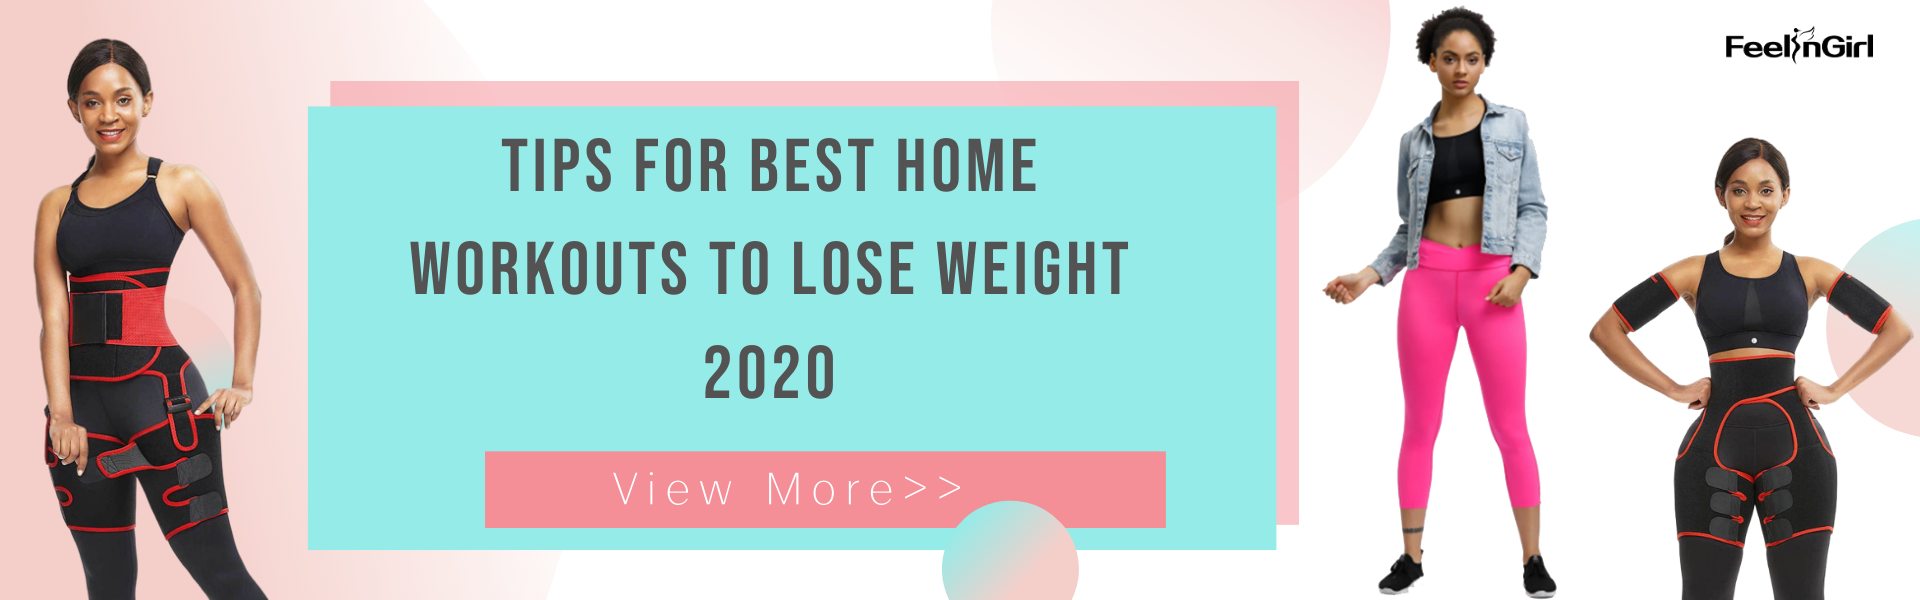 Tips for Best Home Workouts to Lose Weight 2020